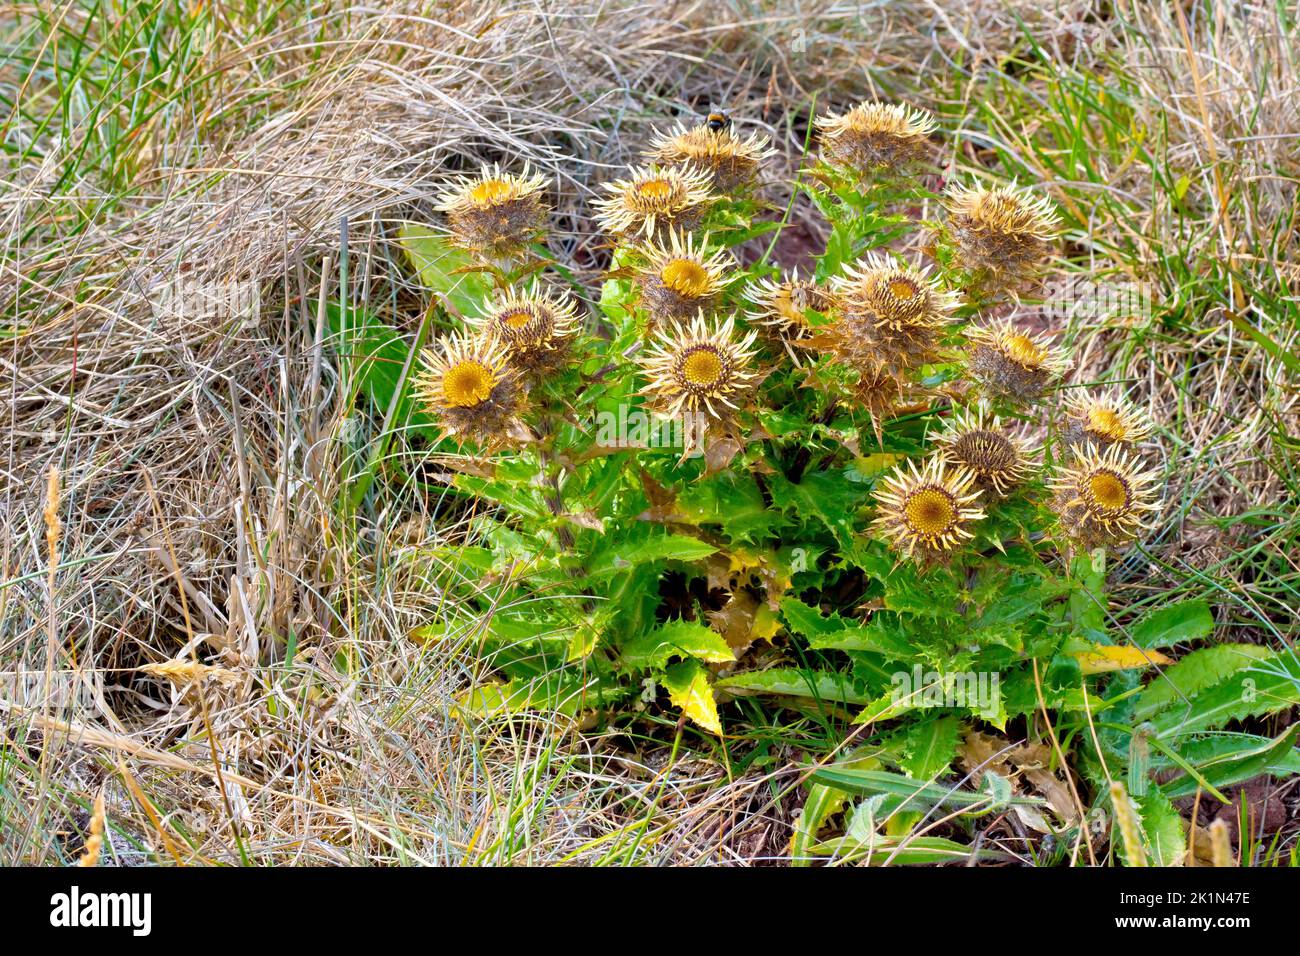 Carline Thistle (carlina vulgaris), close up of a cluster of plants, showing the prickly leaves and distinctive rayed heads of florets. Stock Photo